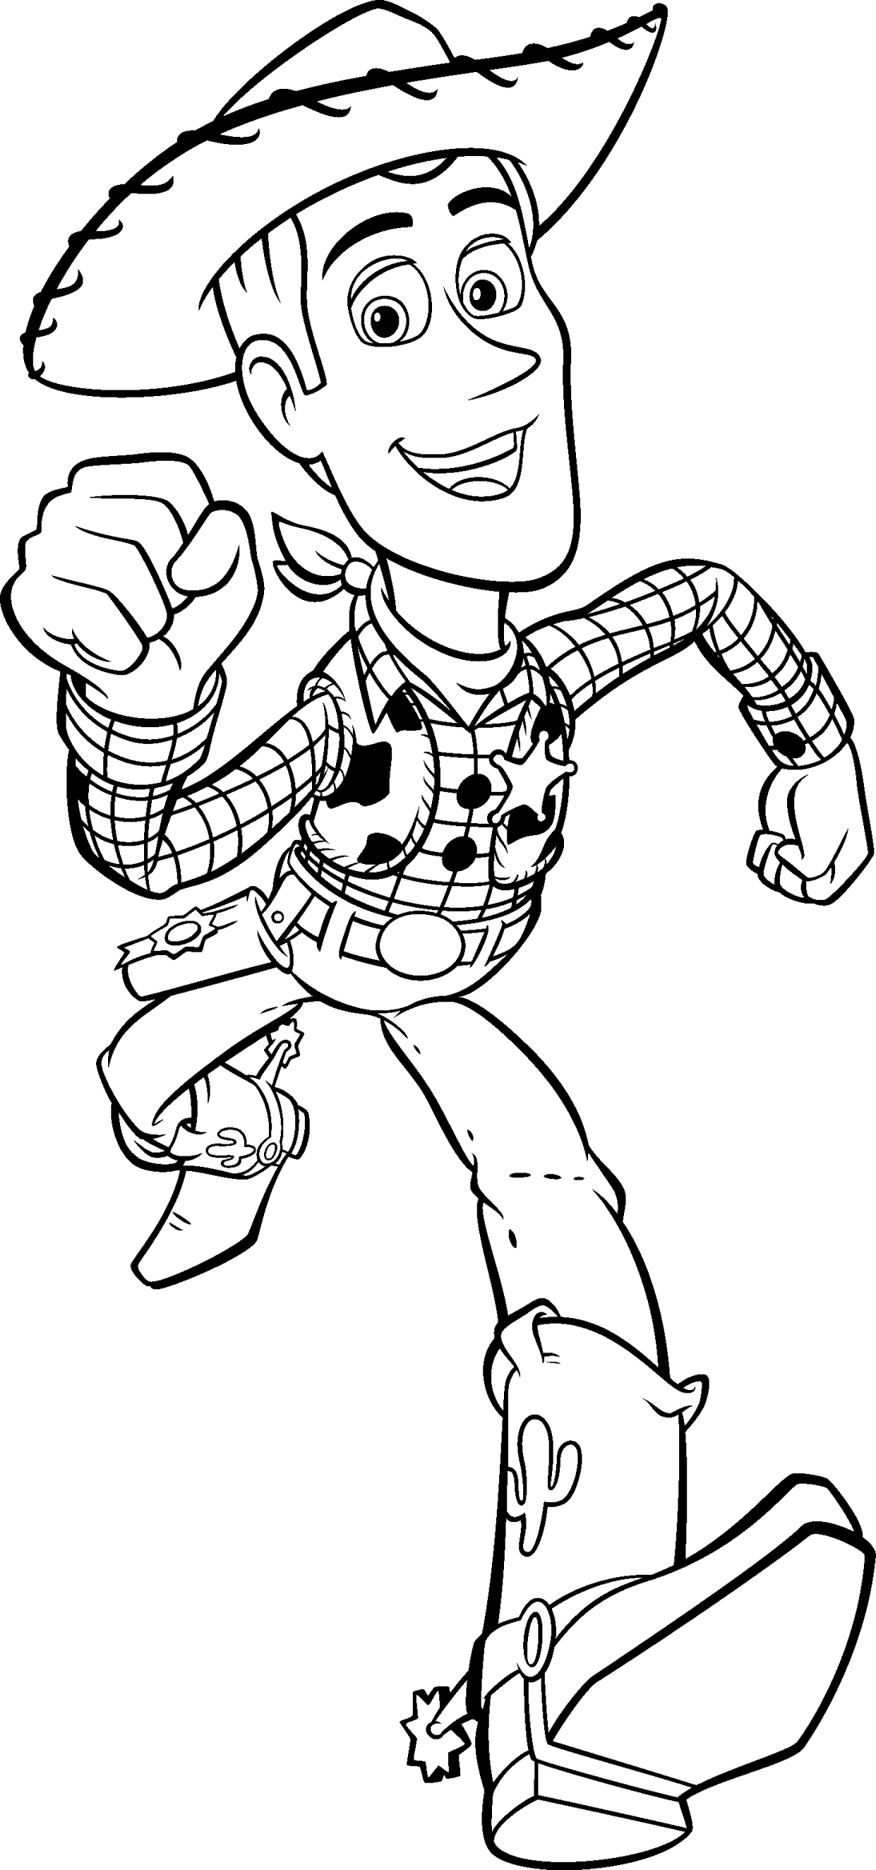 Coloring Pages Disney   Dr. Odd